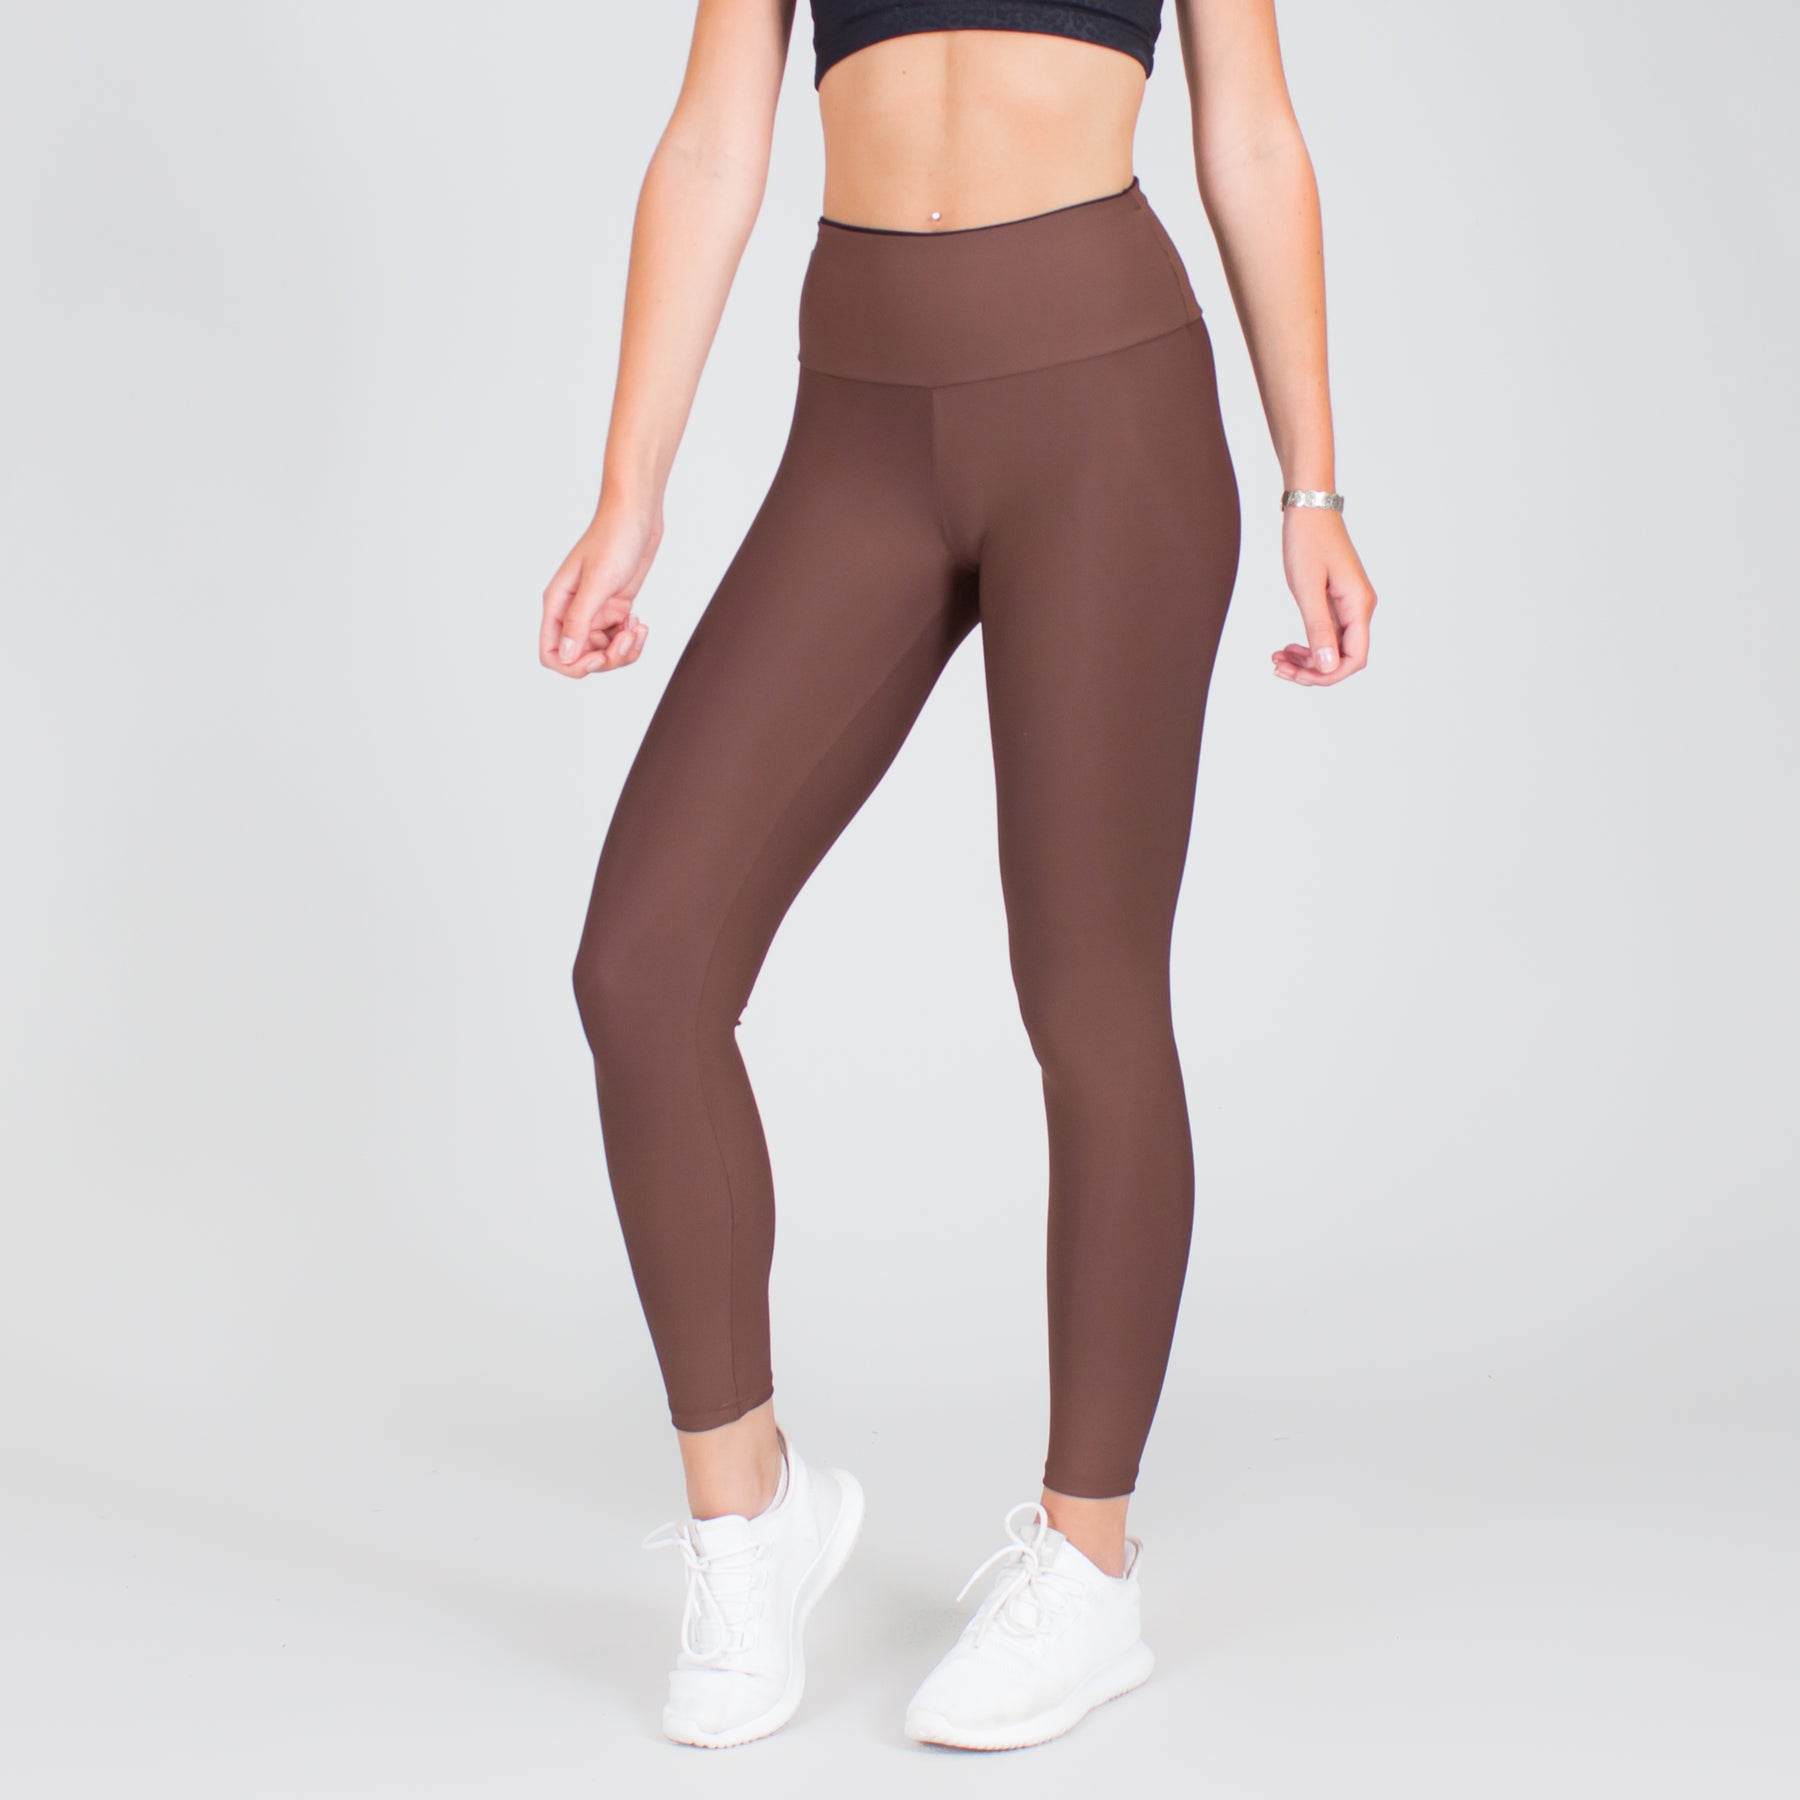 Barely There Leggings Test – Greater Than Sports